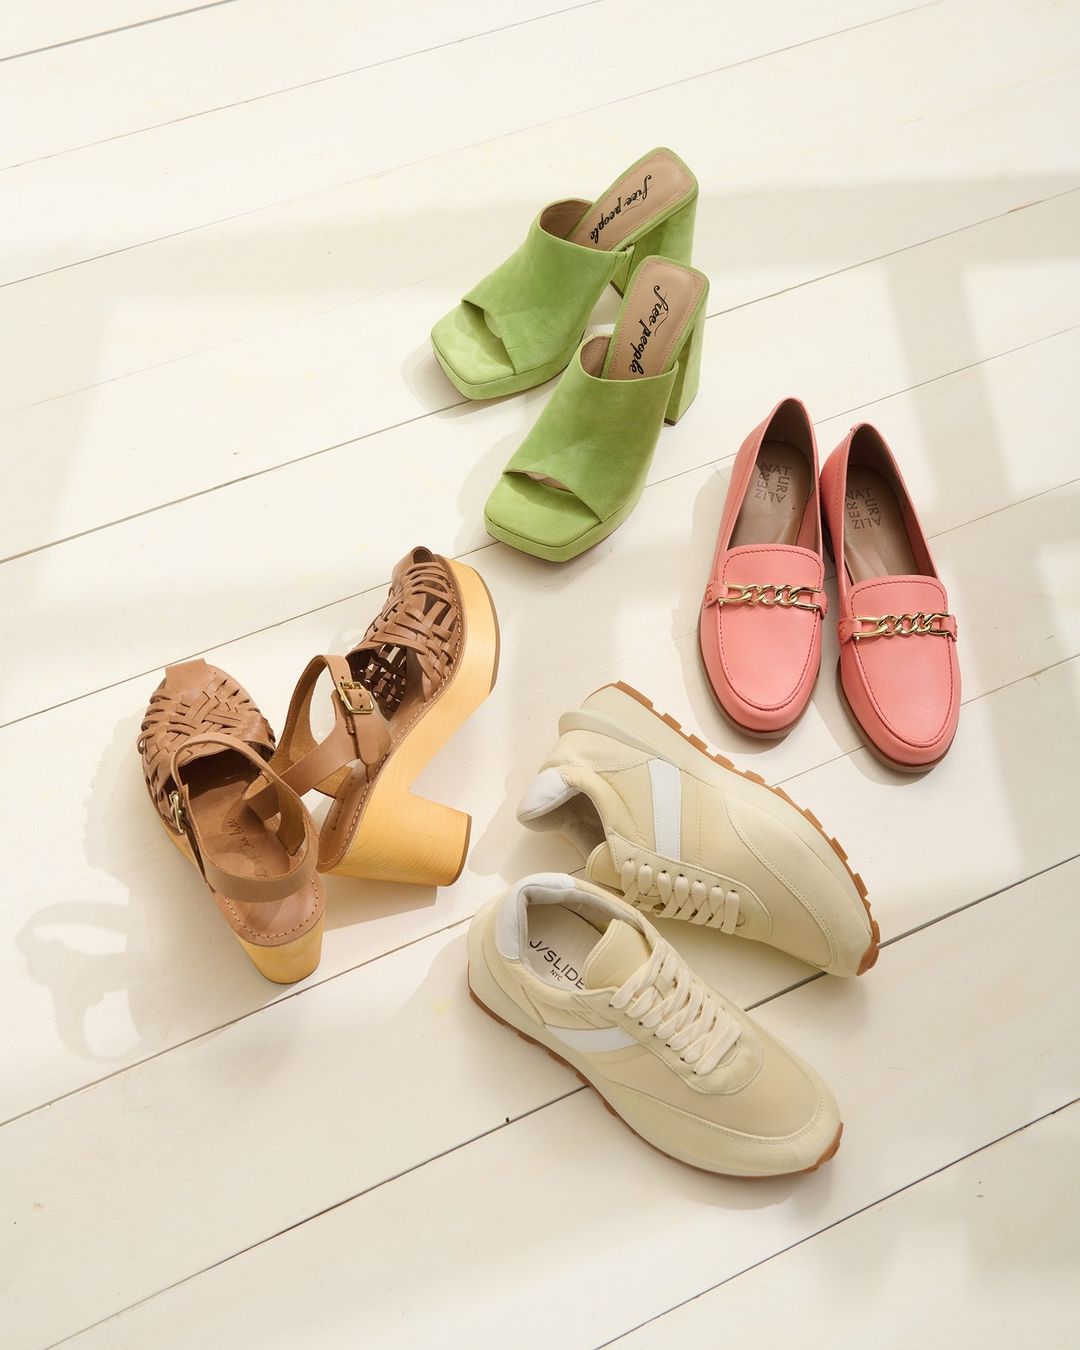 spring coloured variety of shoes, including loafers, heels, and sneakers